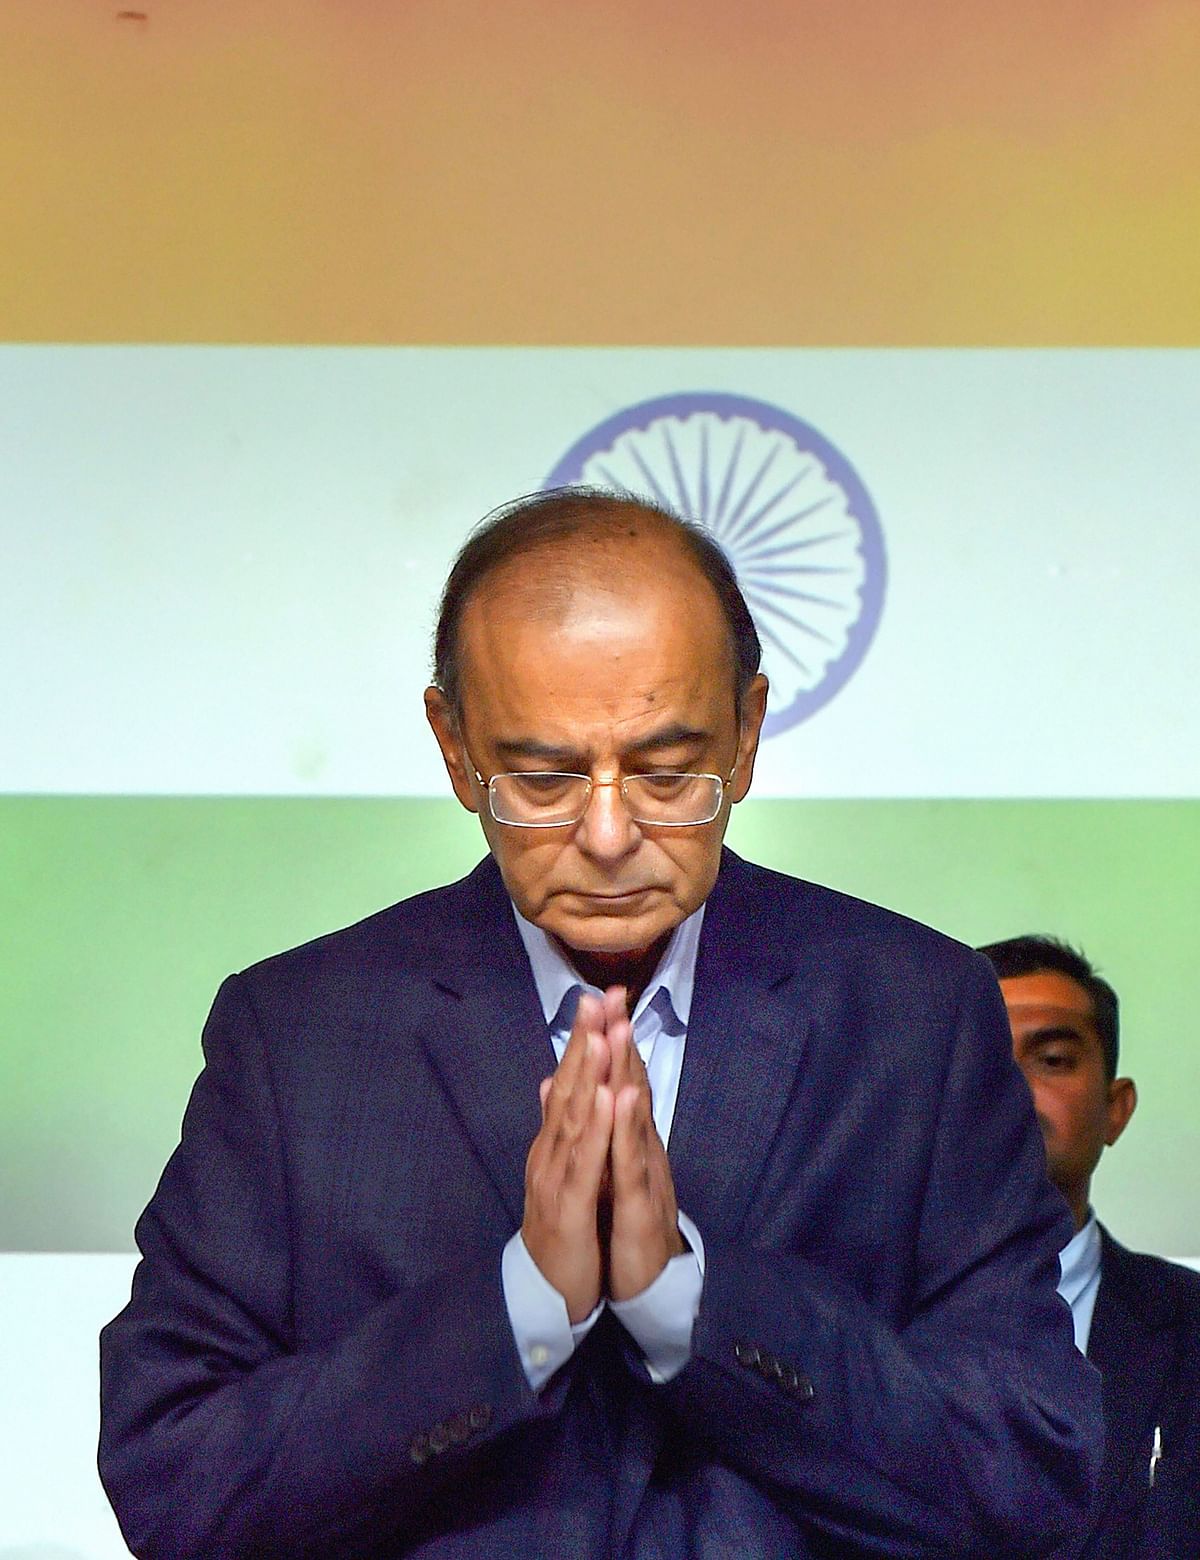 Govt to rename NIFM as Arun Jaitley National Institute of Financial Management